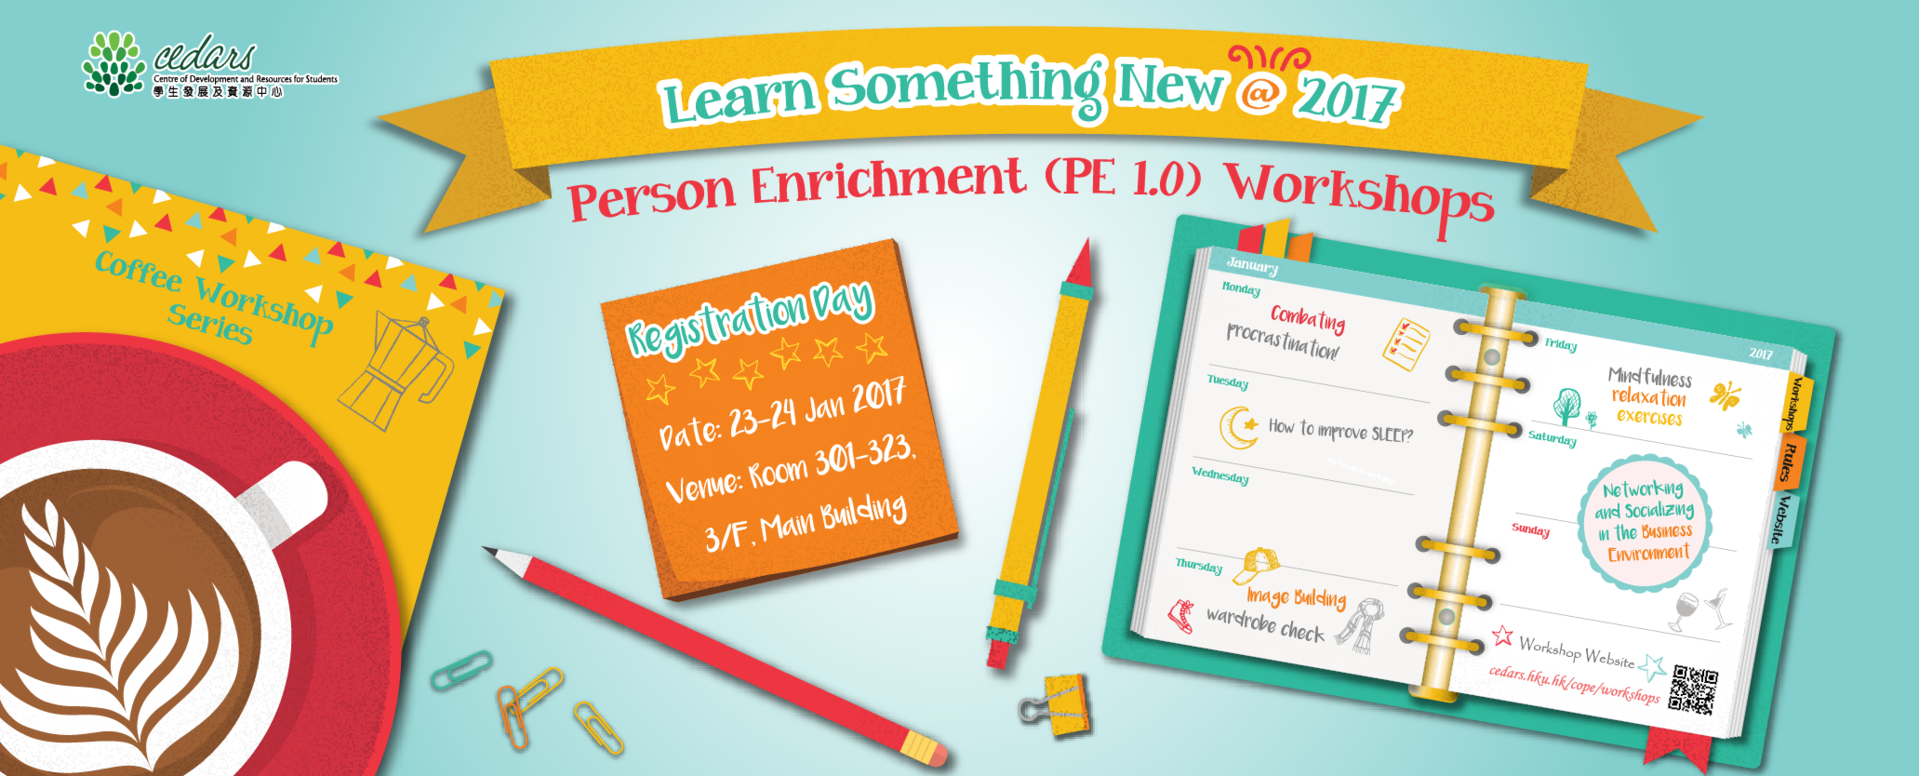 Learn Something NEW @ 2017! Person Enrichment Workshops Open For Enrollment!